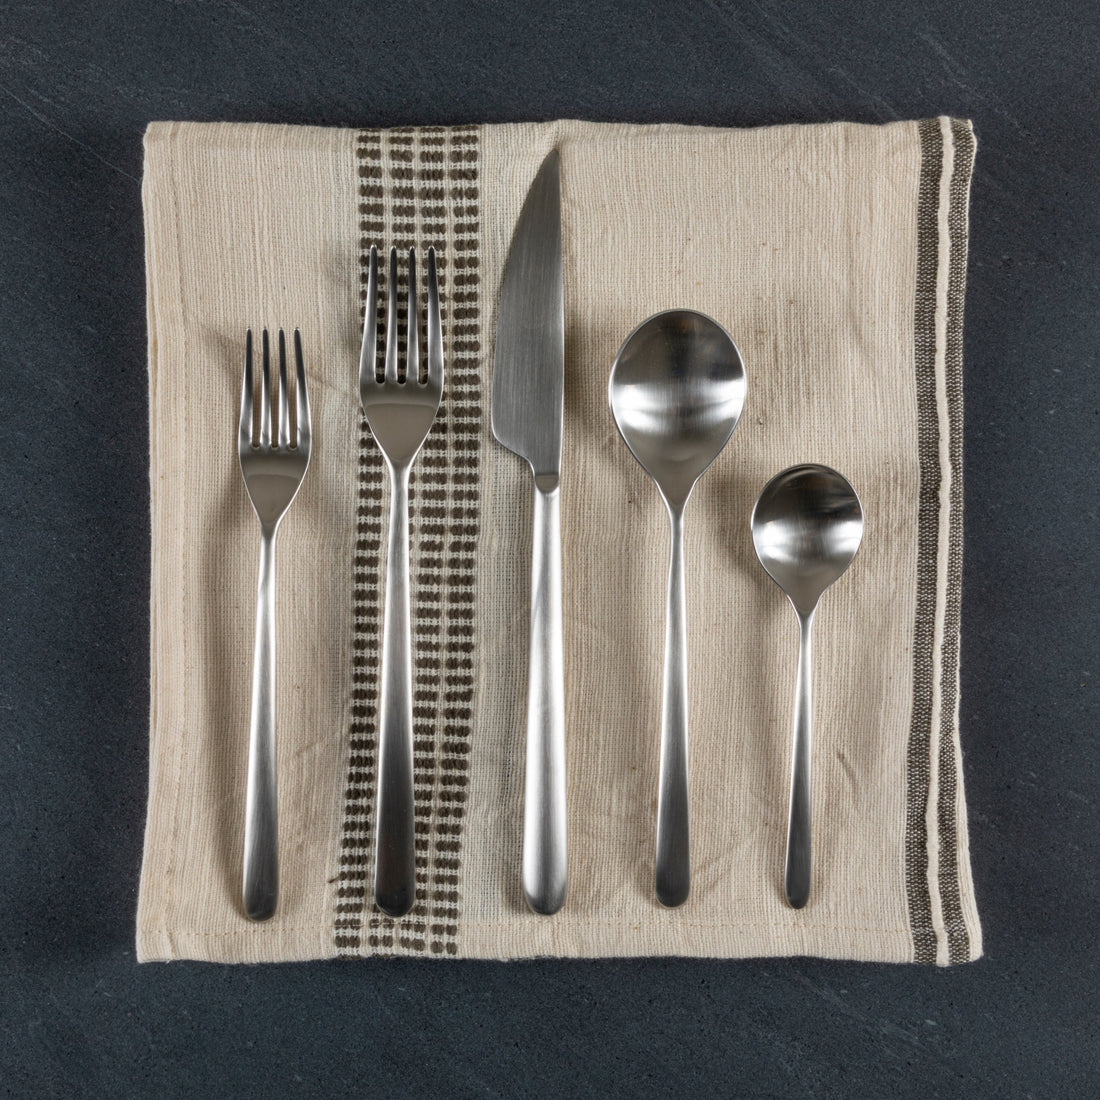 Linea Ice Stainless Flatware Set